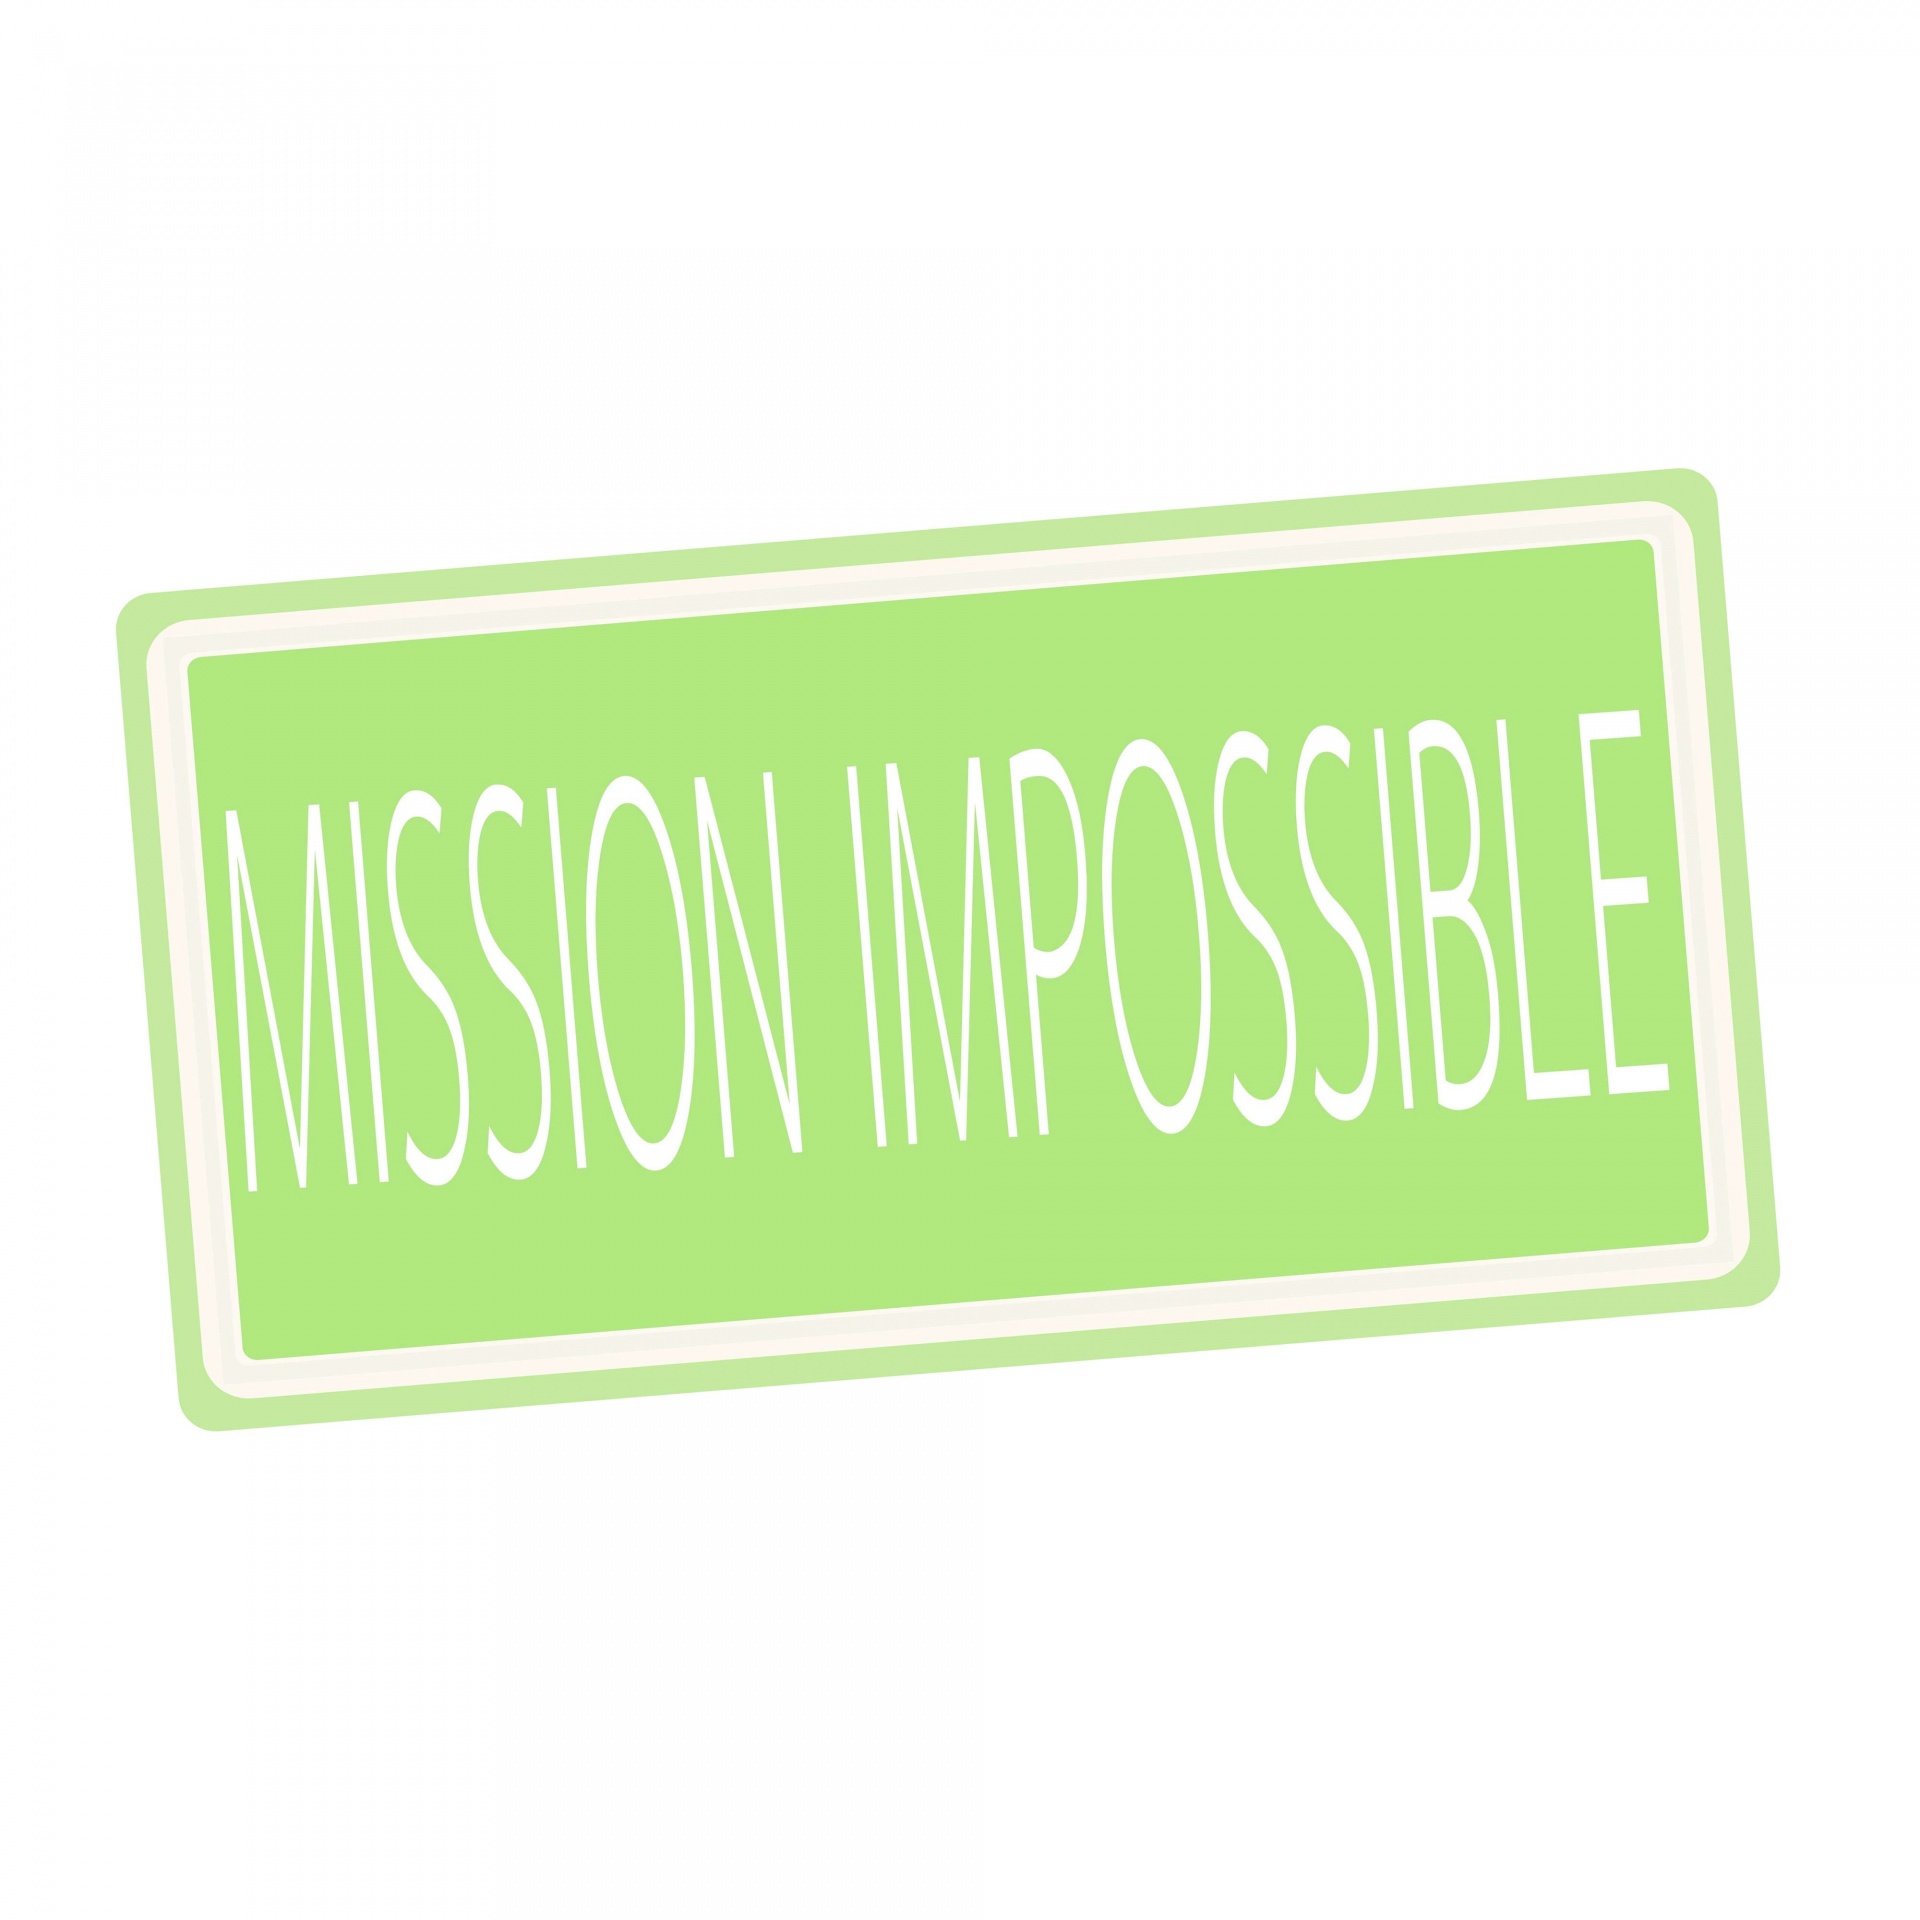 Mission Impossible White Stamp Text